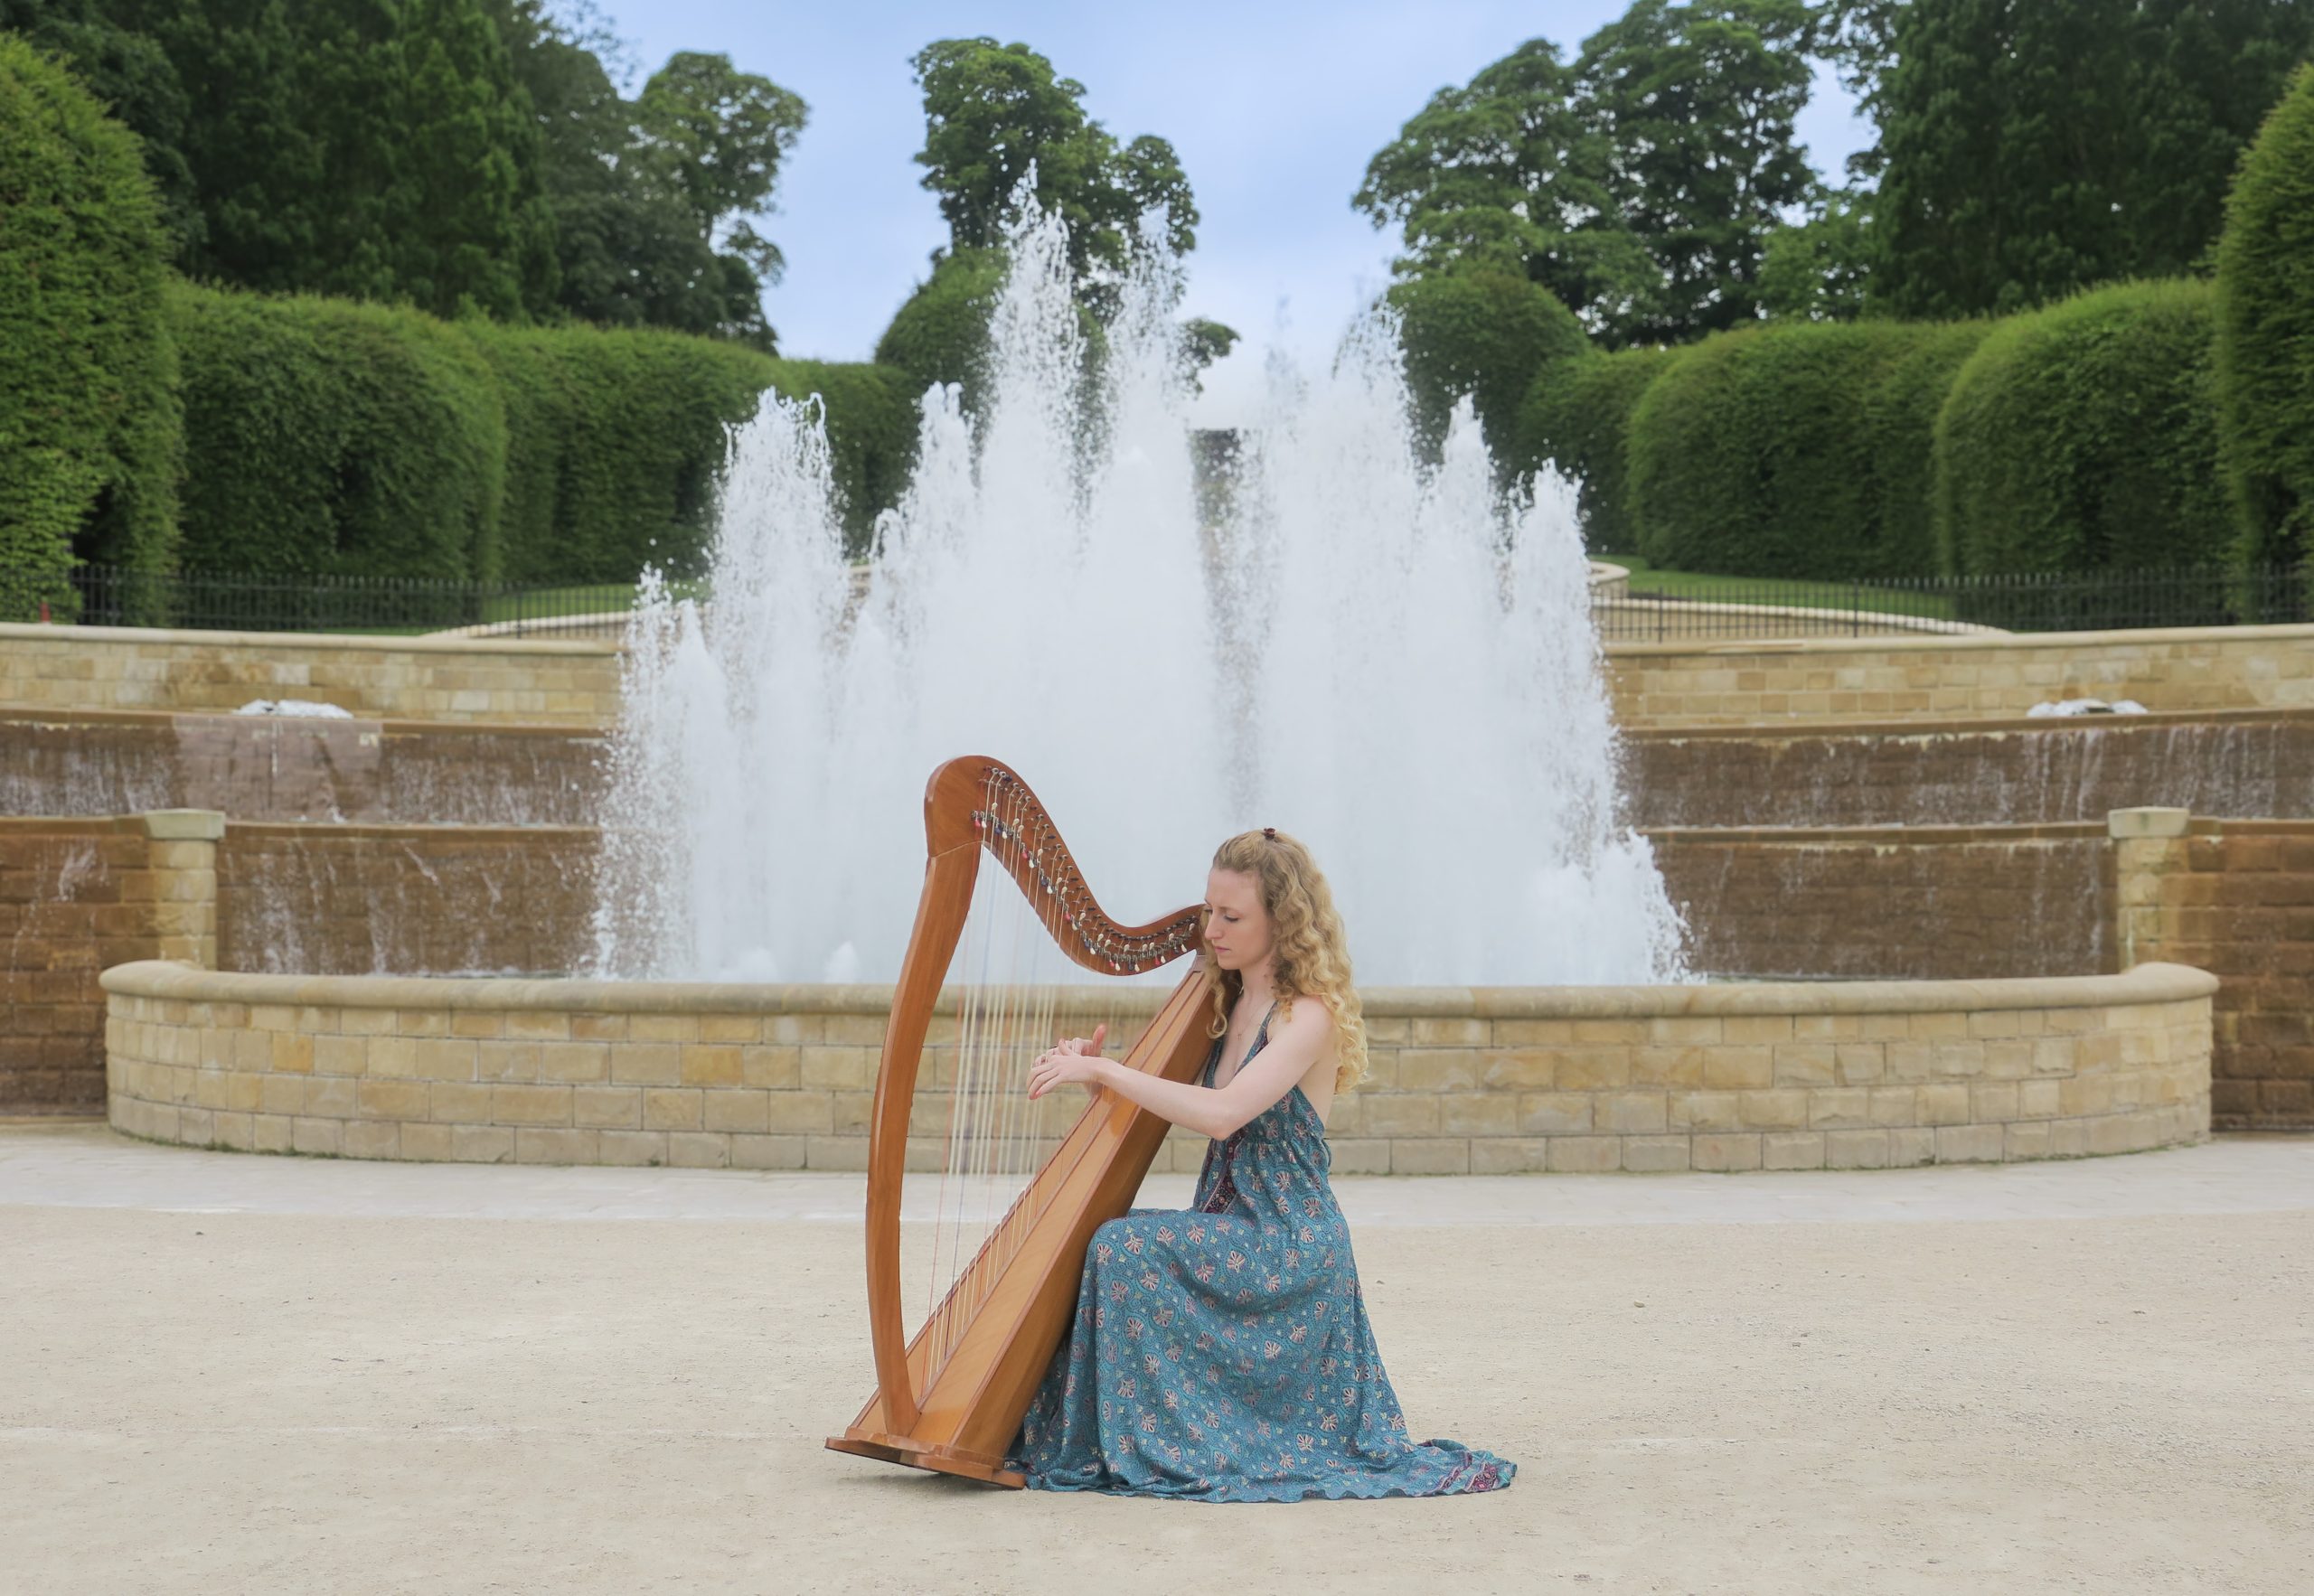 Harpist playing the harp in front of The Alnwick Gardens water fountain.